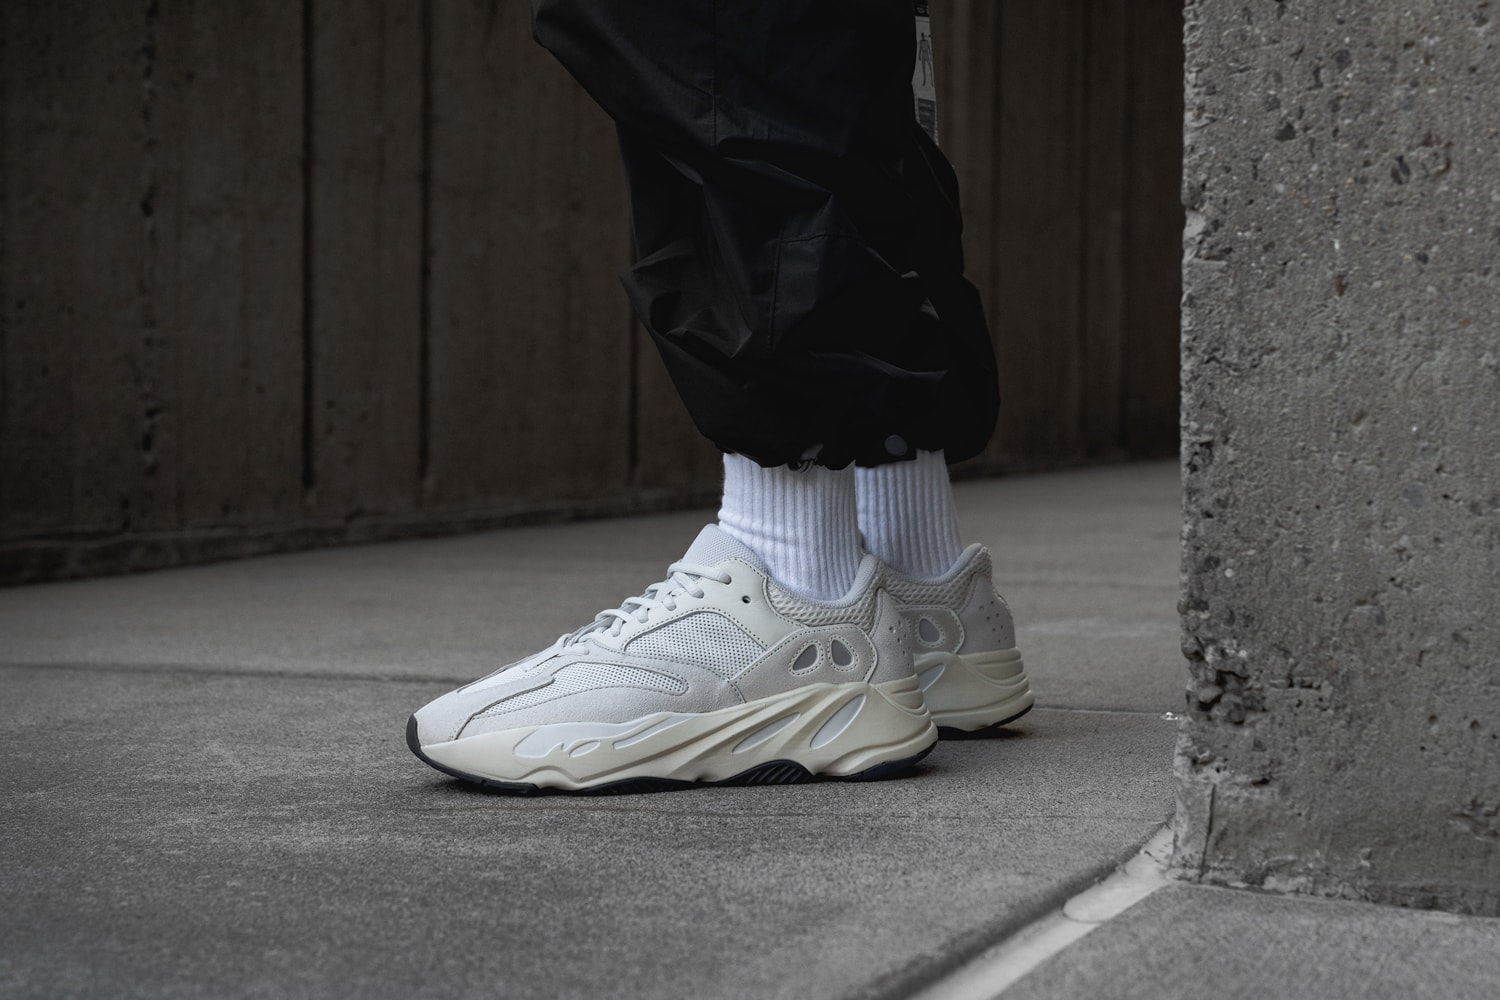 adidas YEEZY BOOST 700 Analog On-Foot Look Kanye West White Grey Sail Release info Date